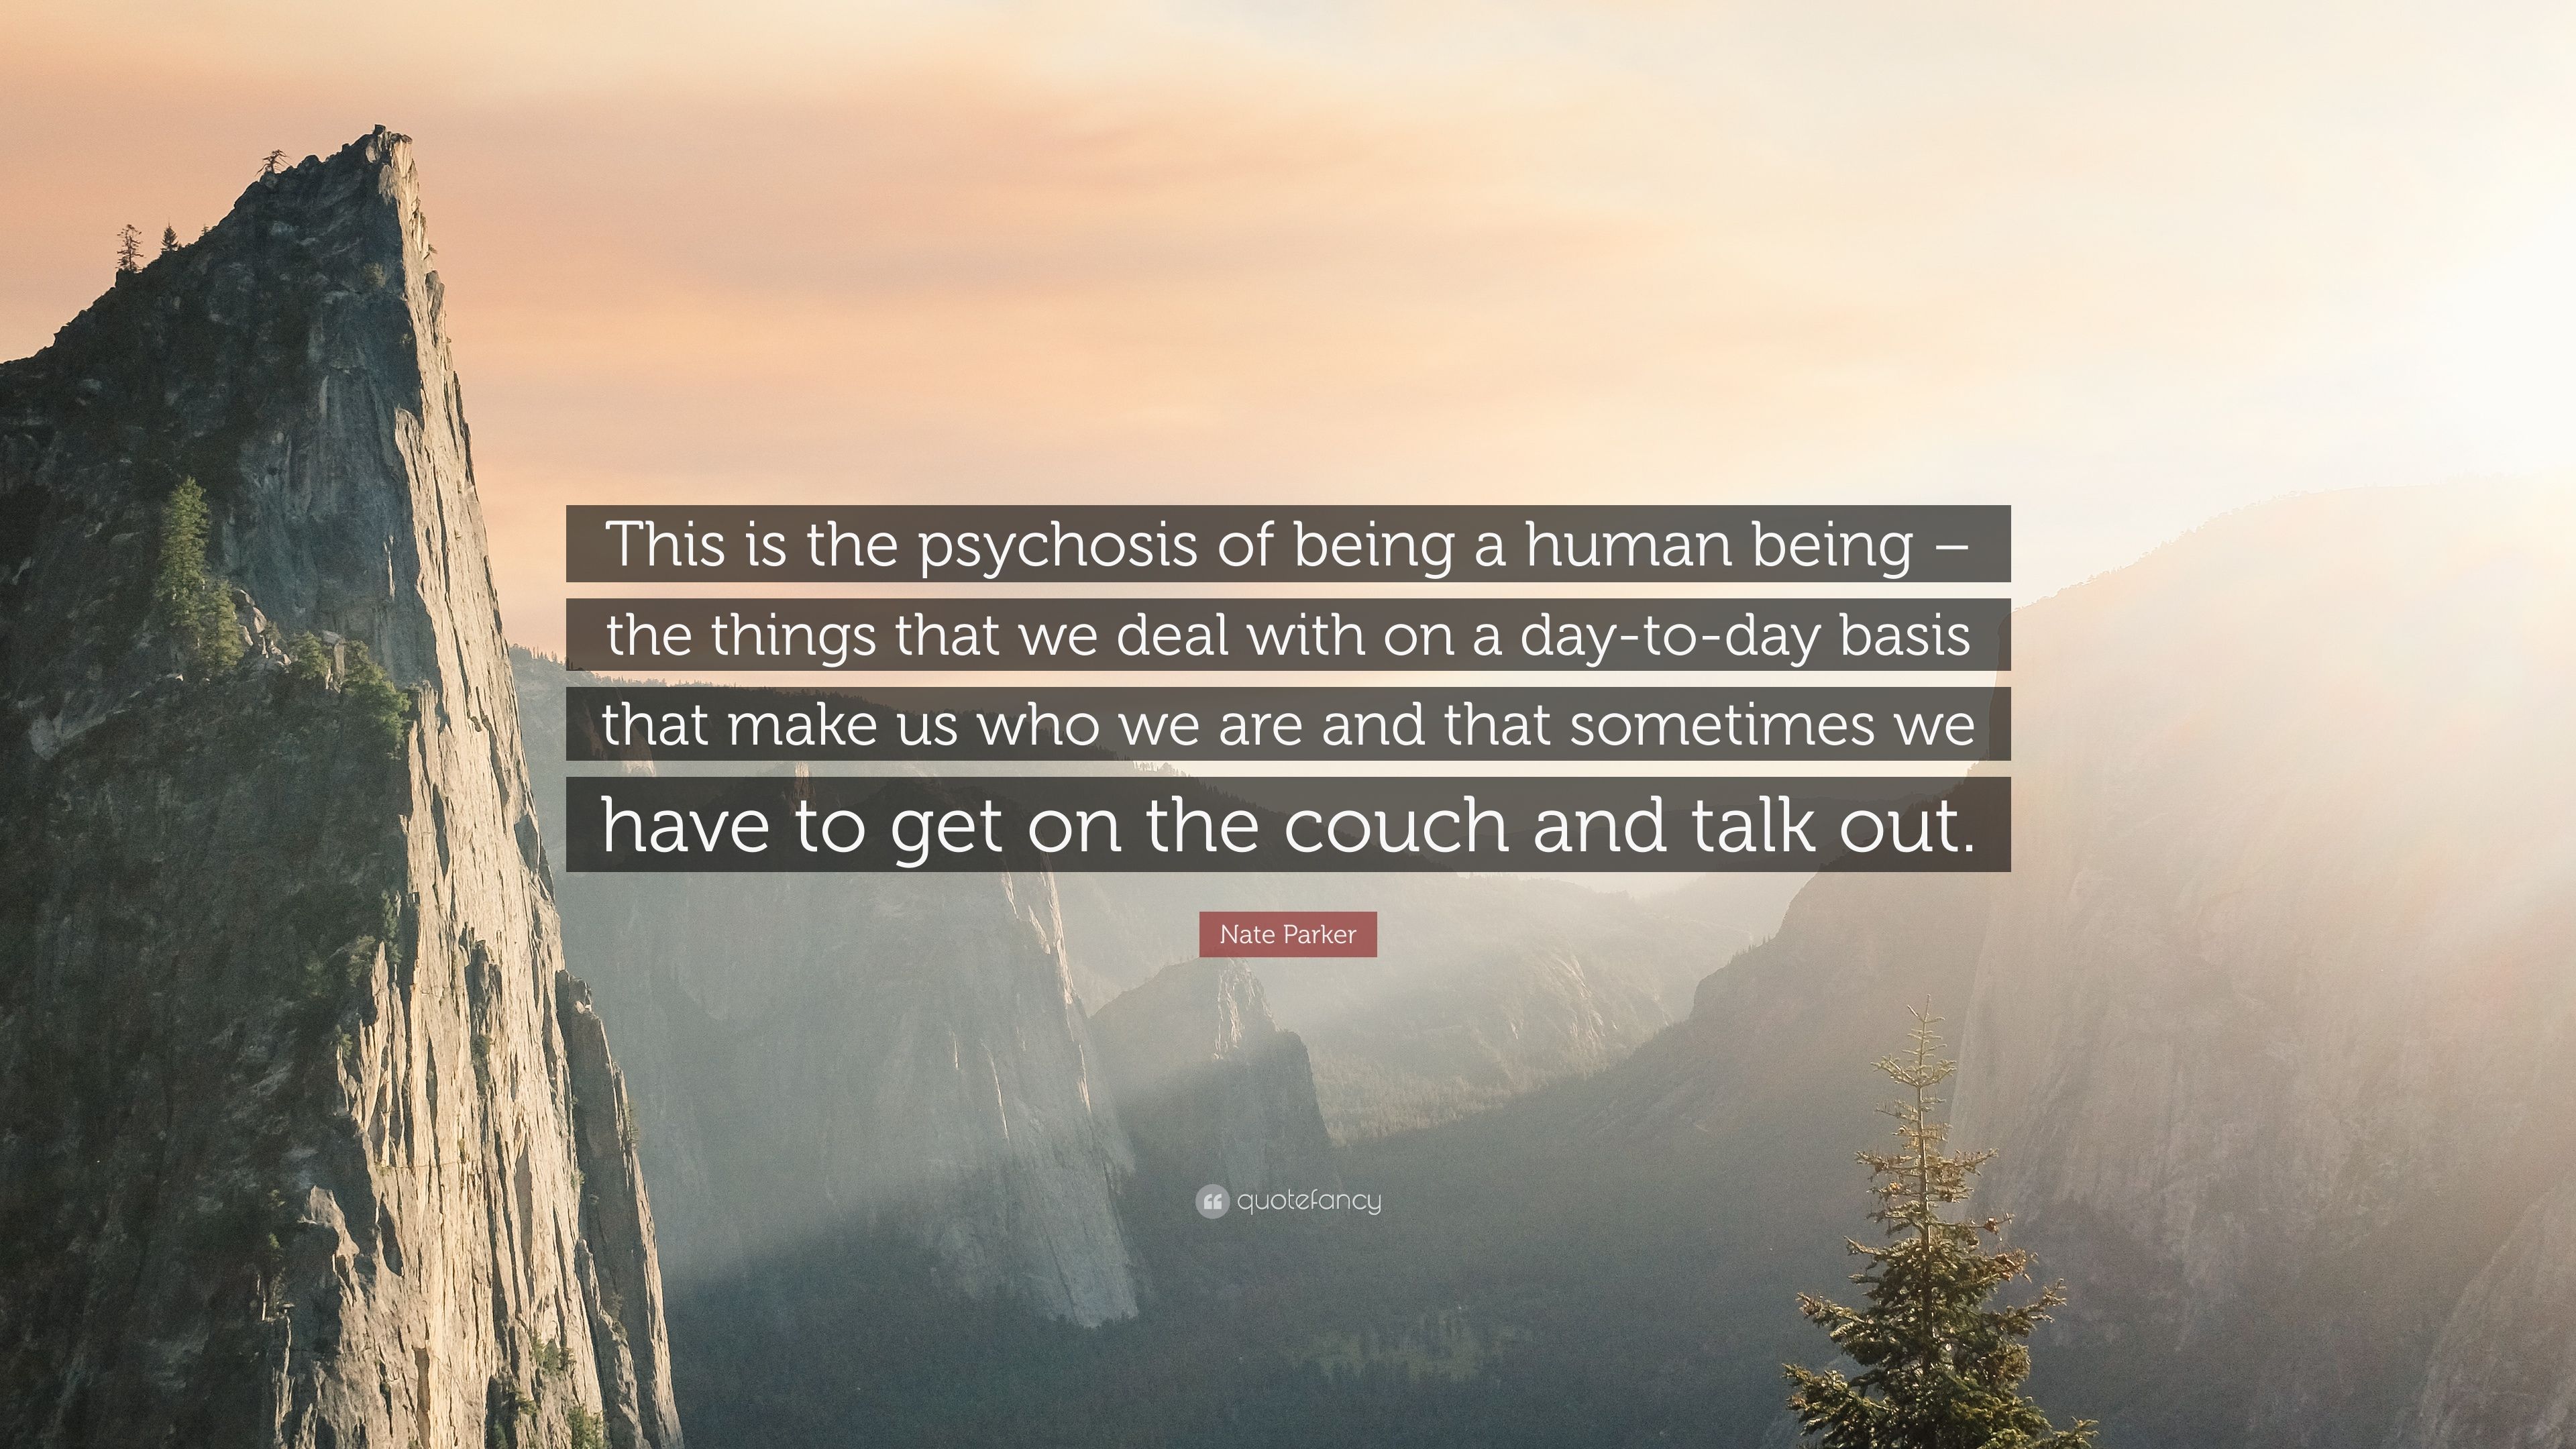 Nate Parker Quote: “This is the psychosis of being a human being